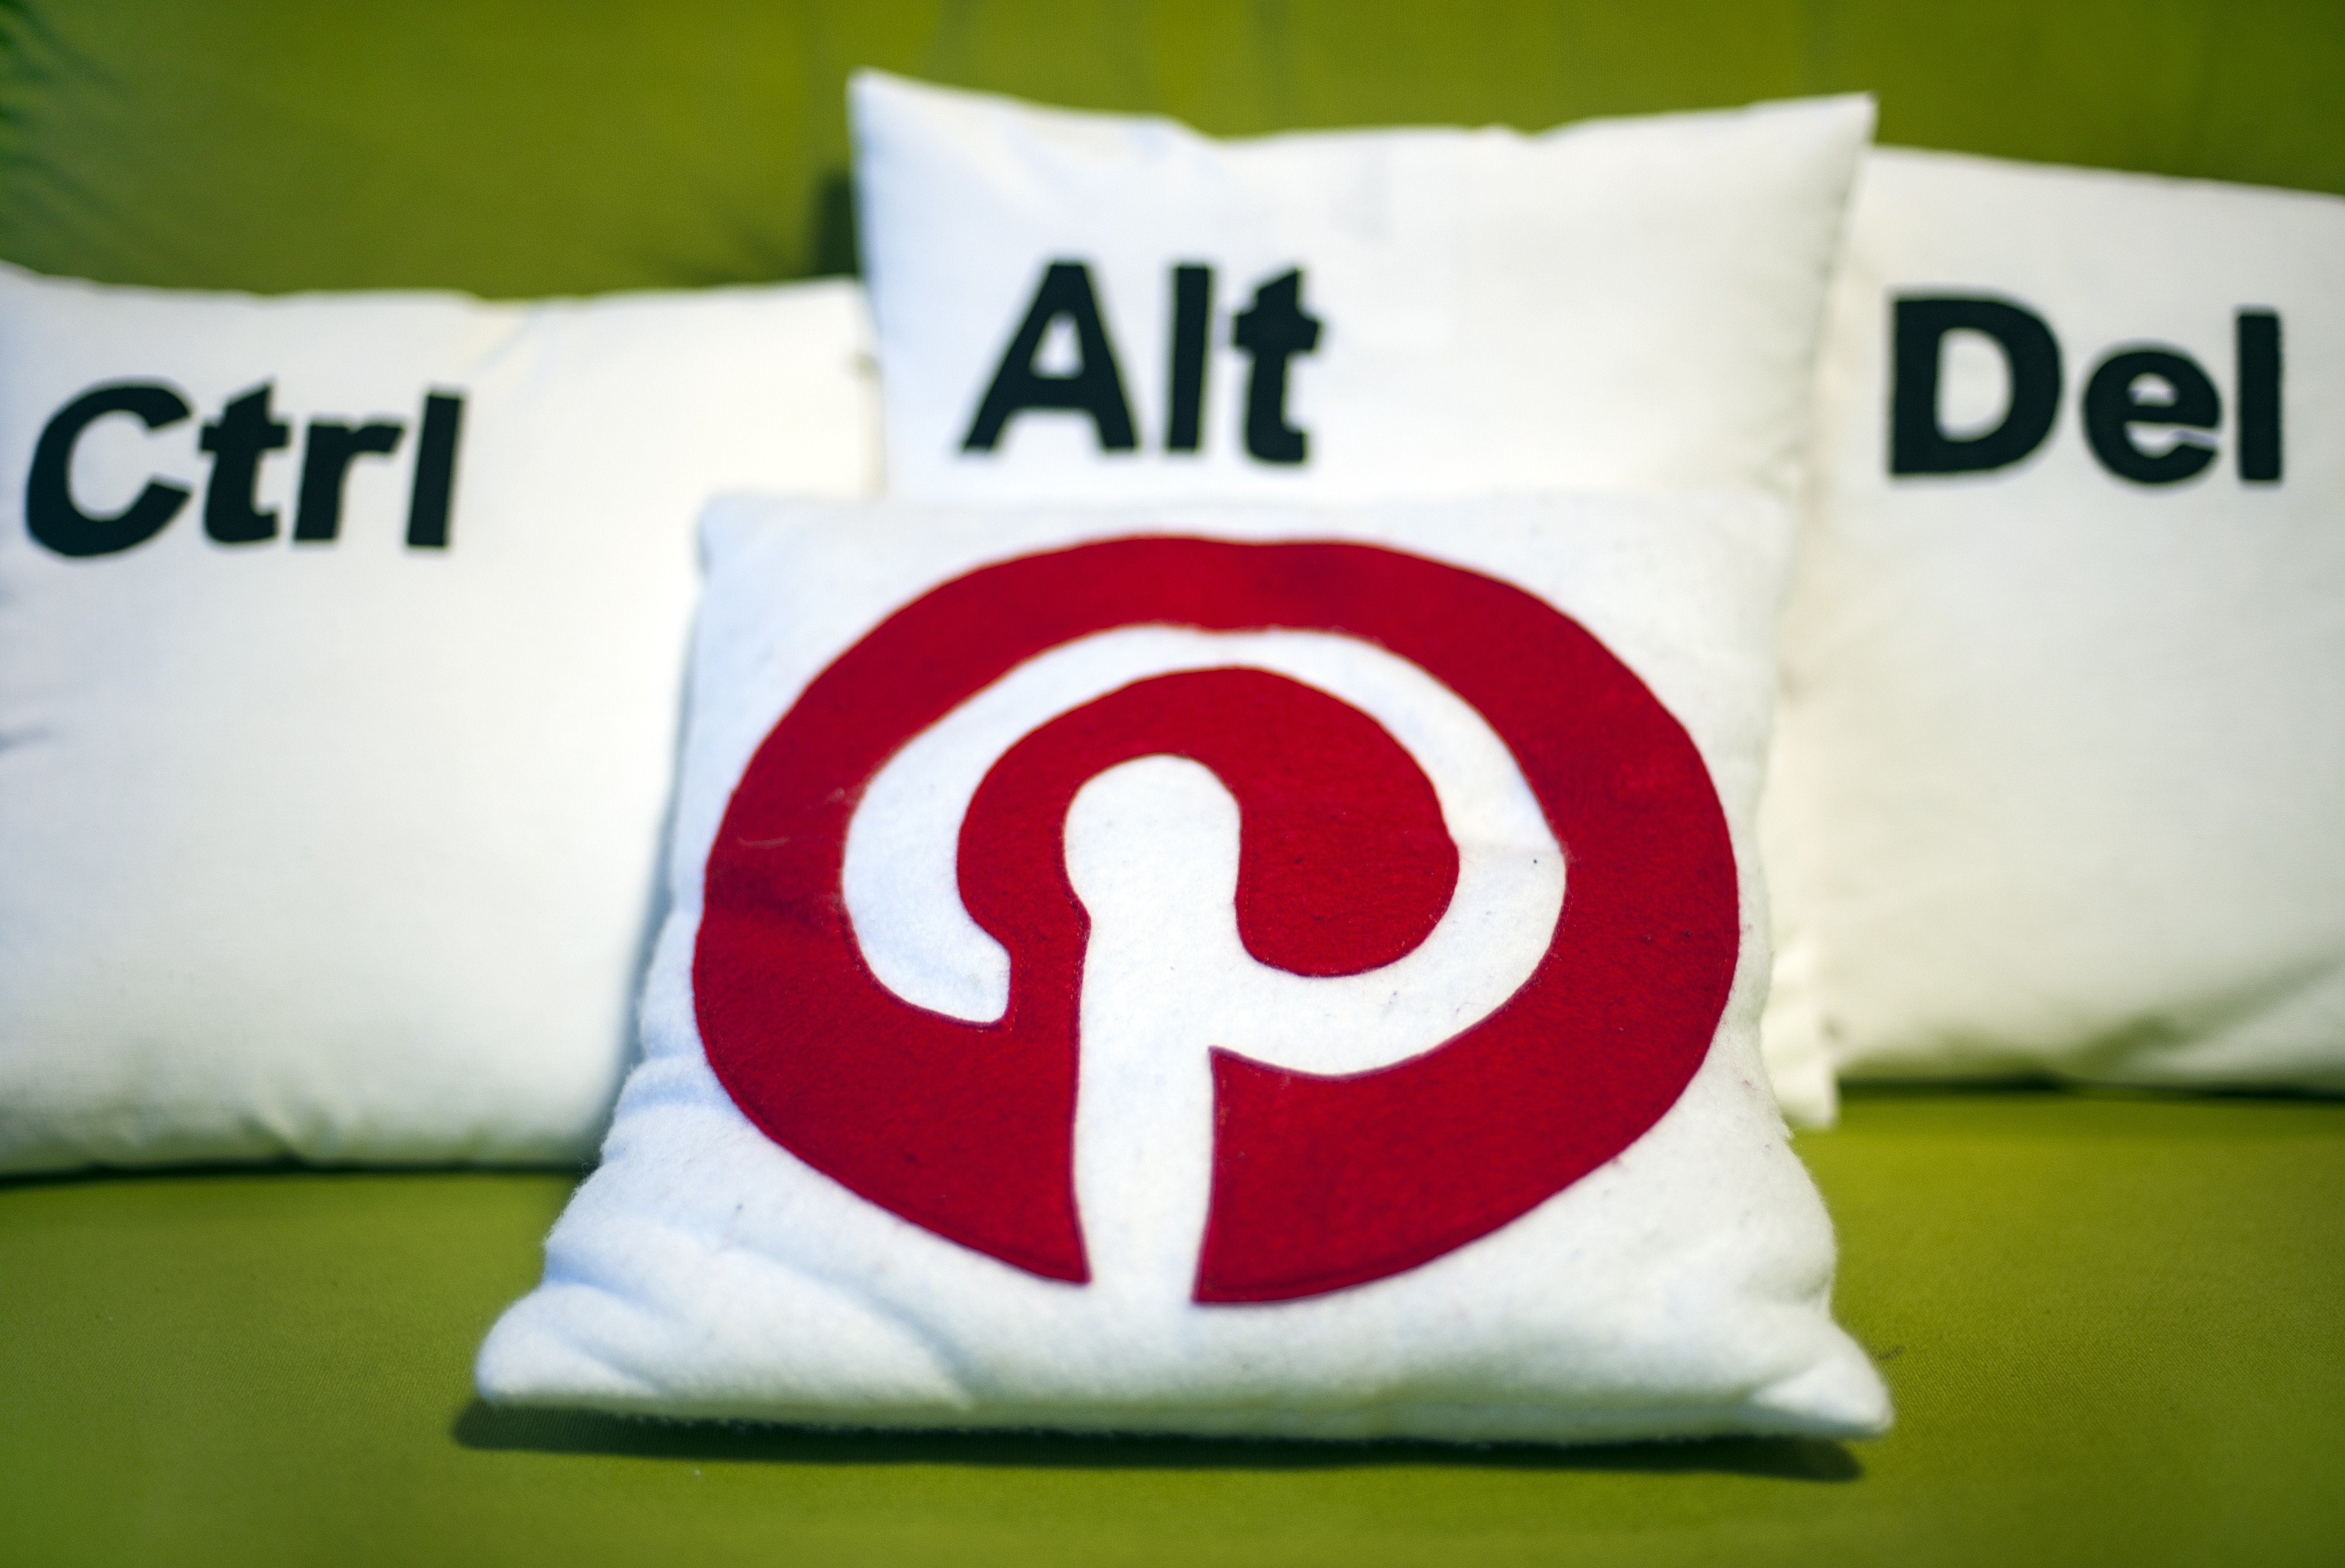 Decorative pillows set the scene at a Pinterest media event at the company's corporate headquarters office in San Francisco, California on April 24, 2014. (Josh Edelson&mdash;AFP/Getty Images)